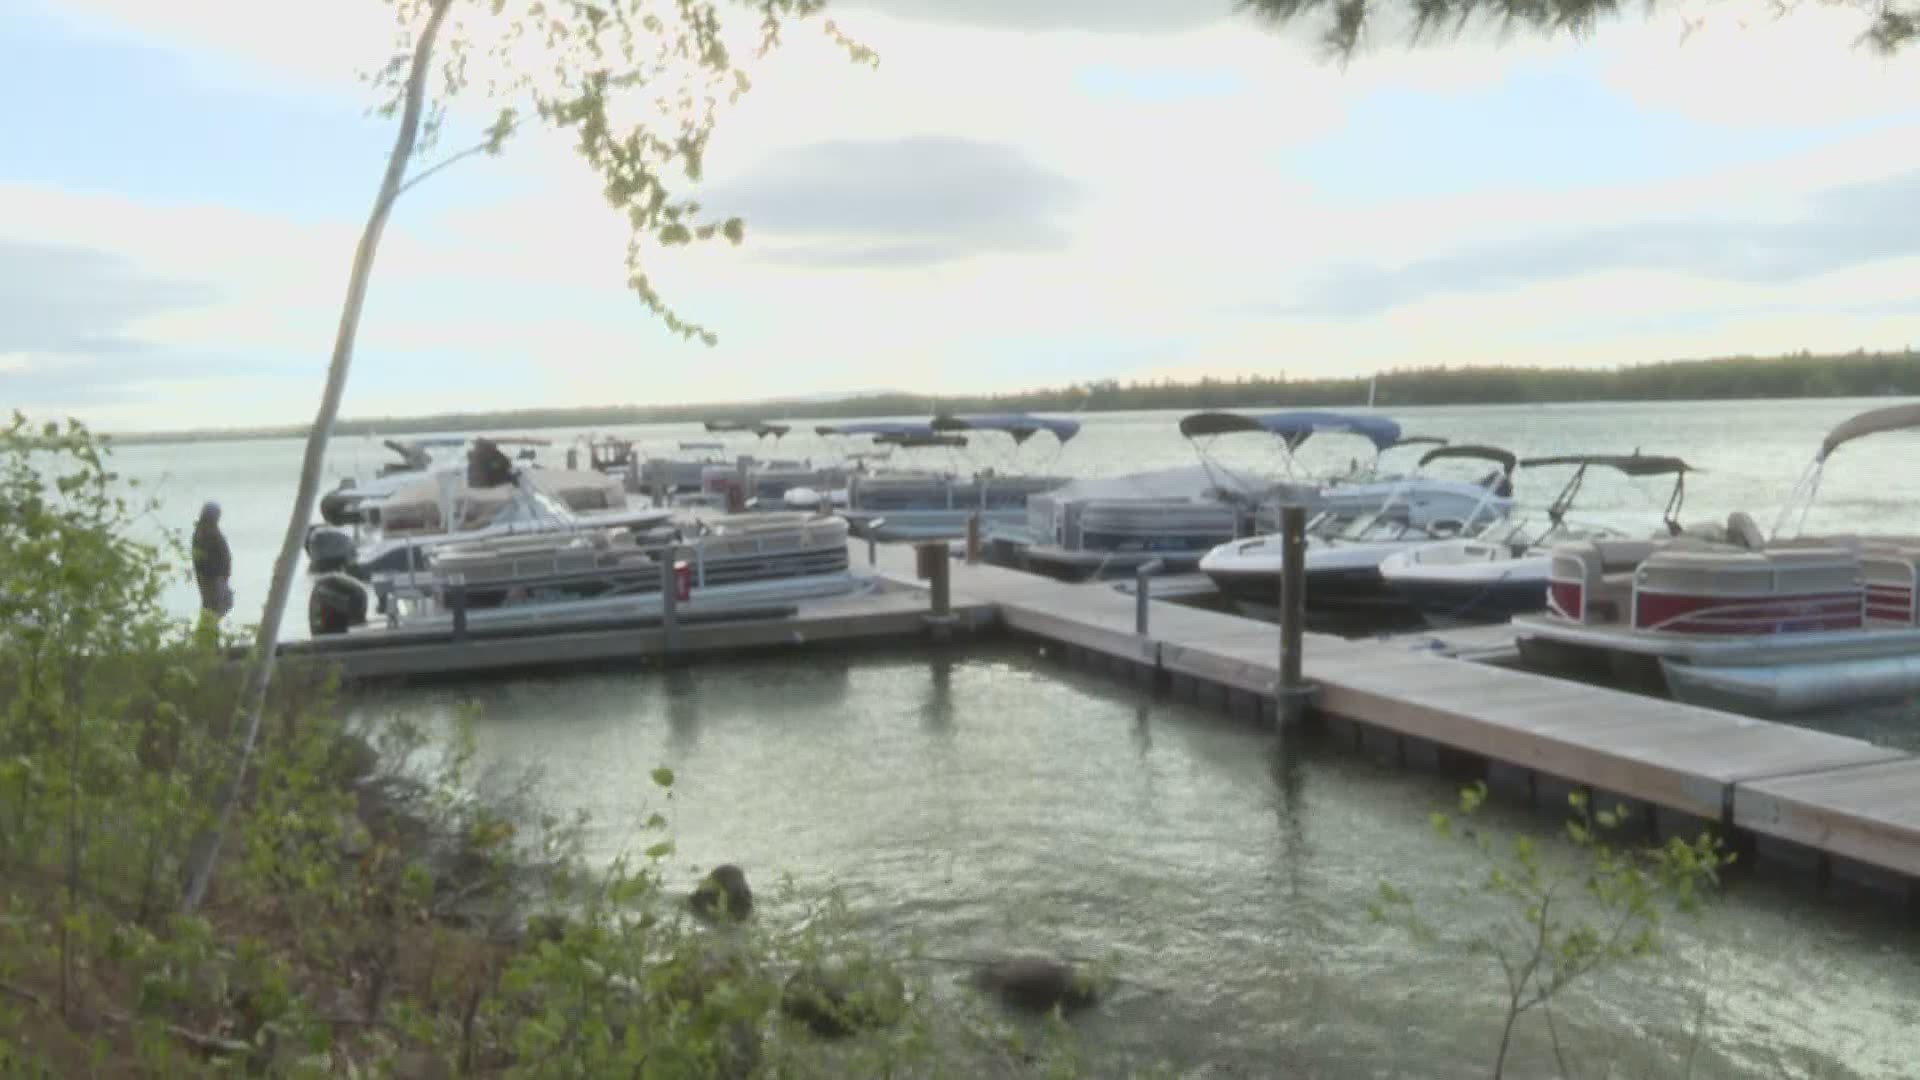 Rescue crews were called in to help a pontoon boat that was reportedly taking on water.